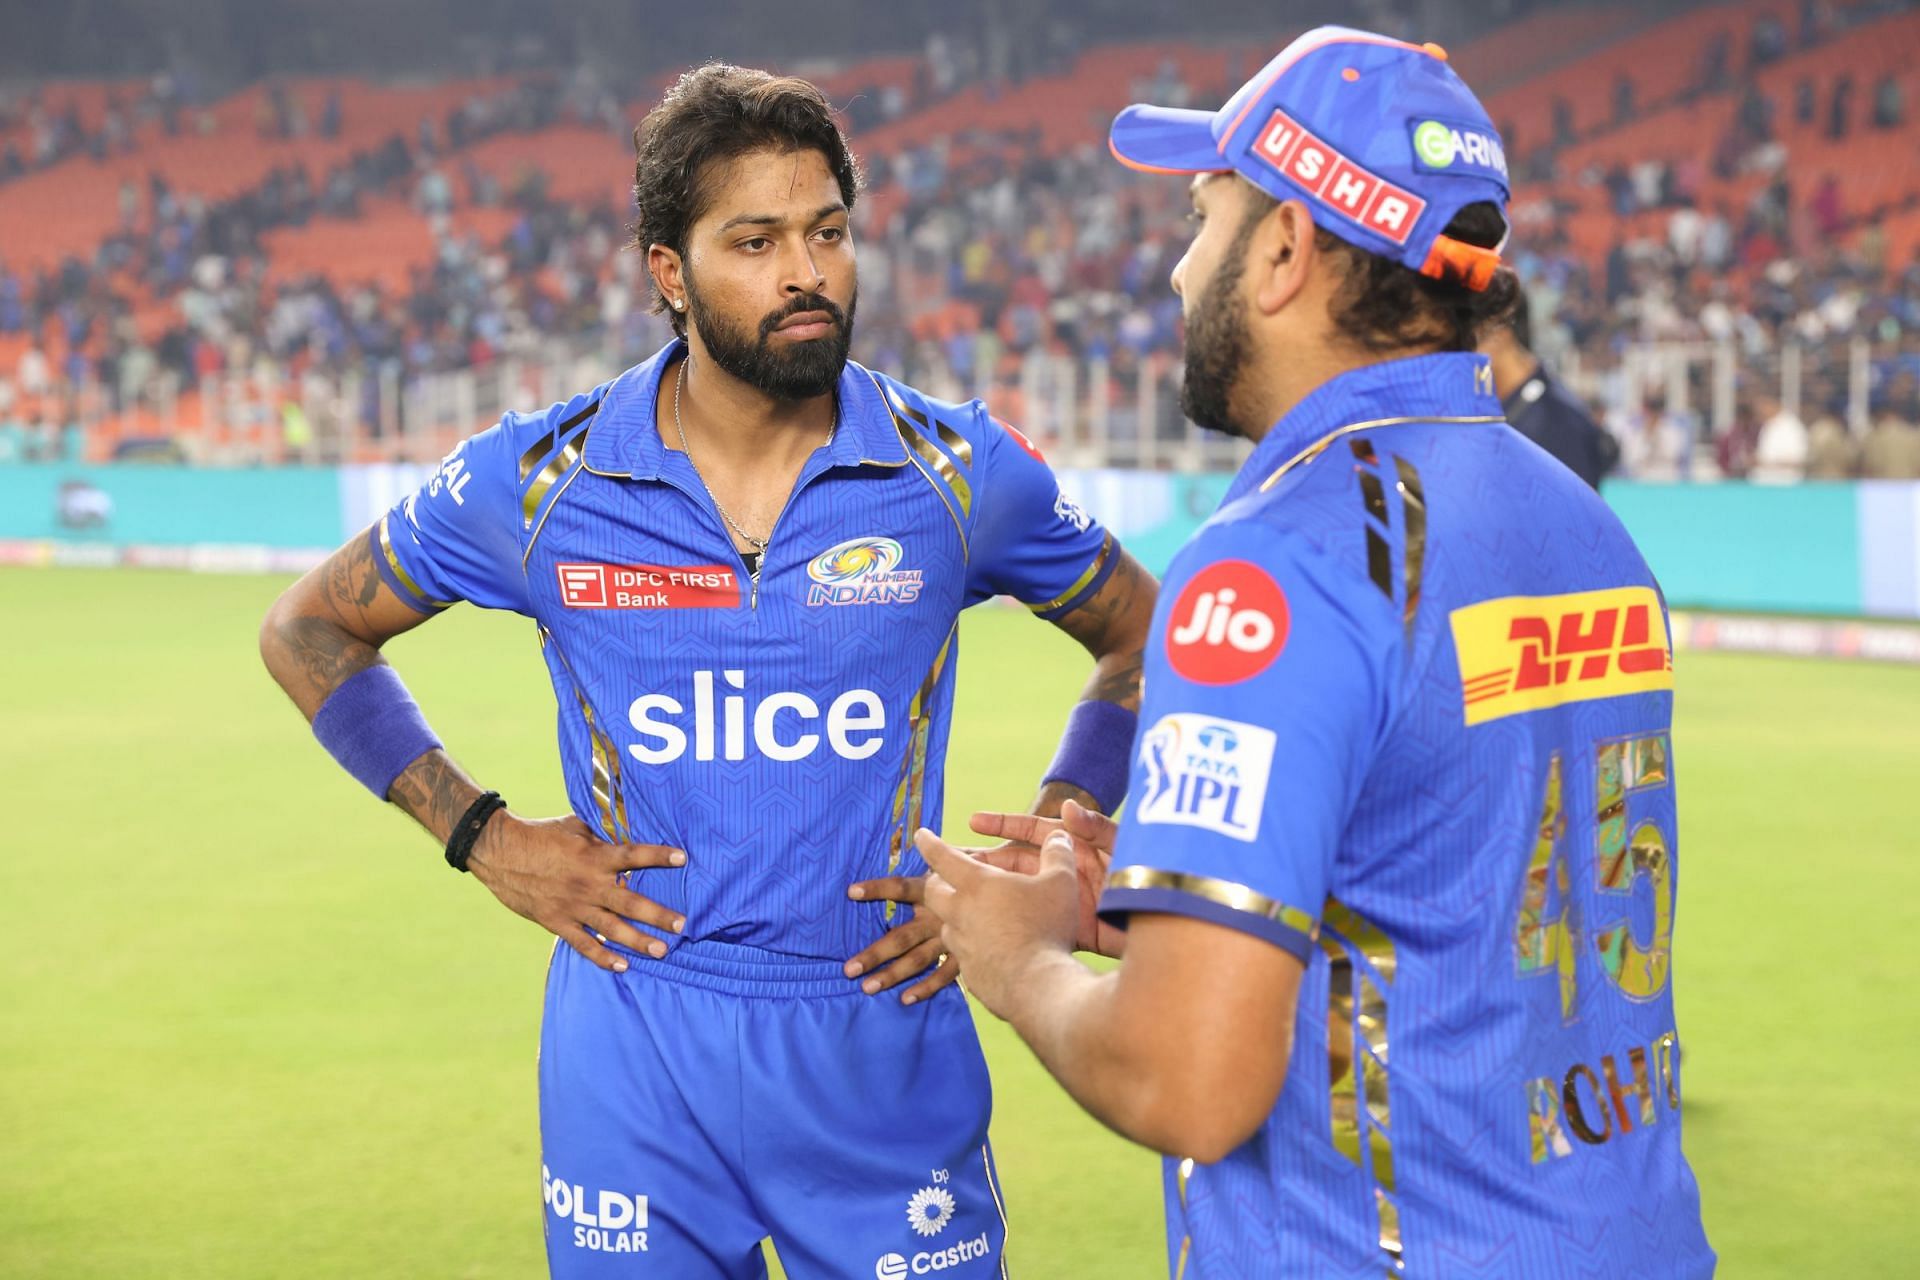 5 most number of losses for MI before a win in an IPL season